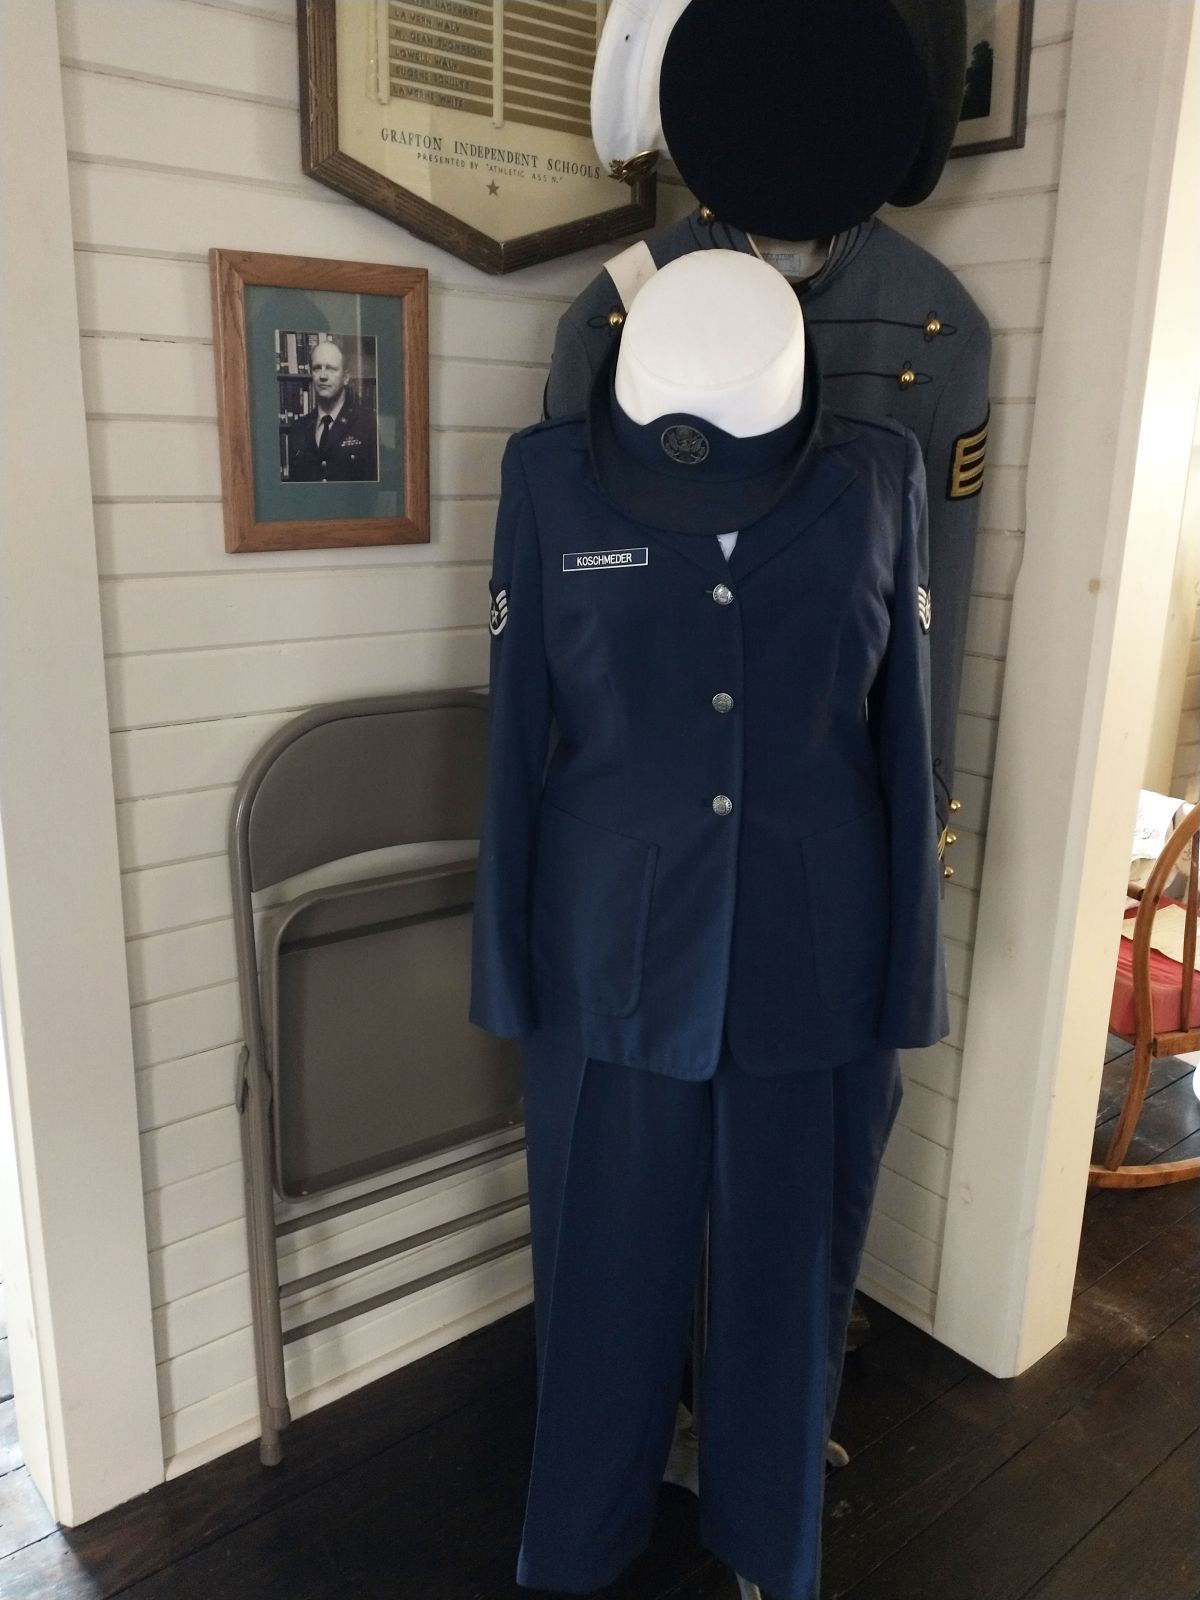 This uniform is of Koschmeder's time serving in the air force. 